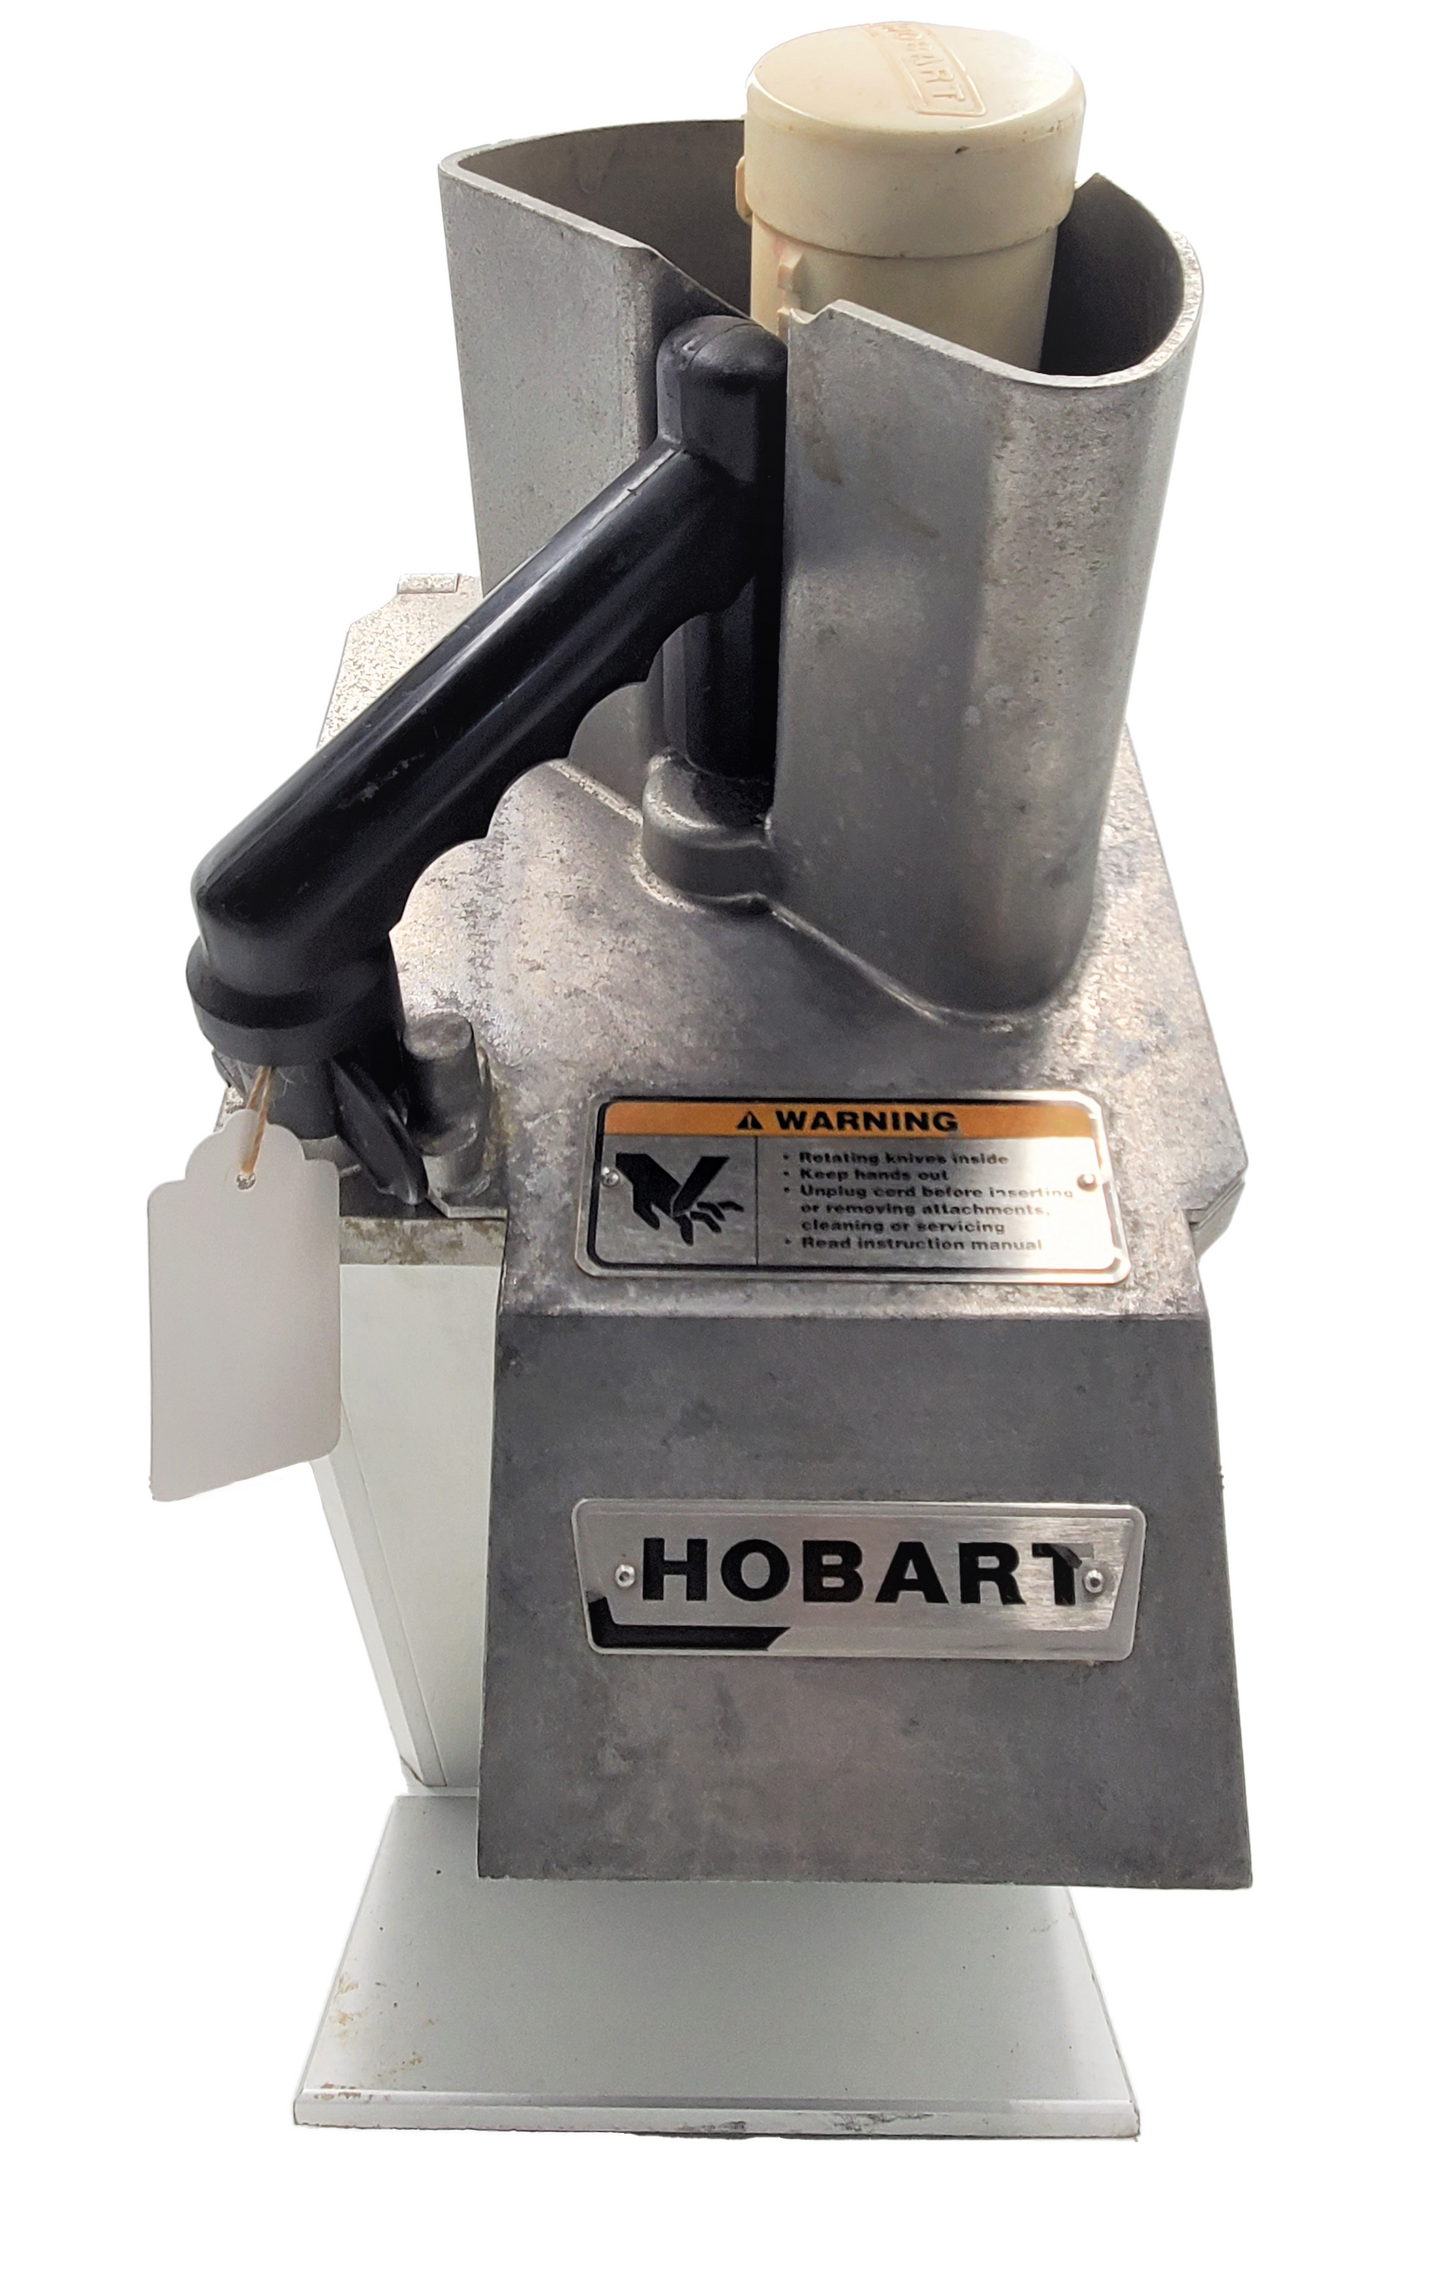 Hobart FP100 Commercial Food Processor (Used)